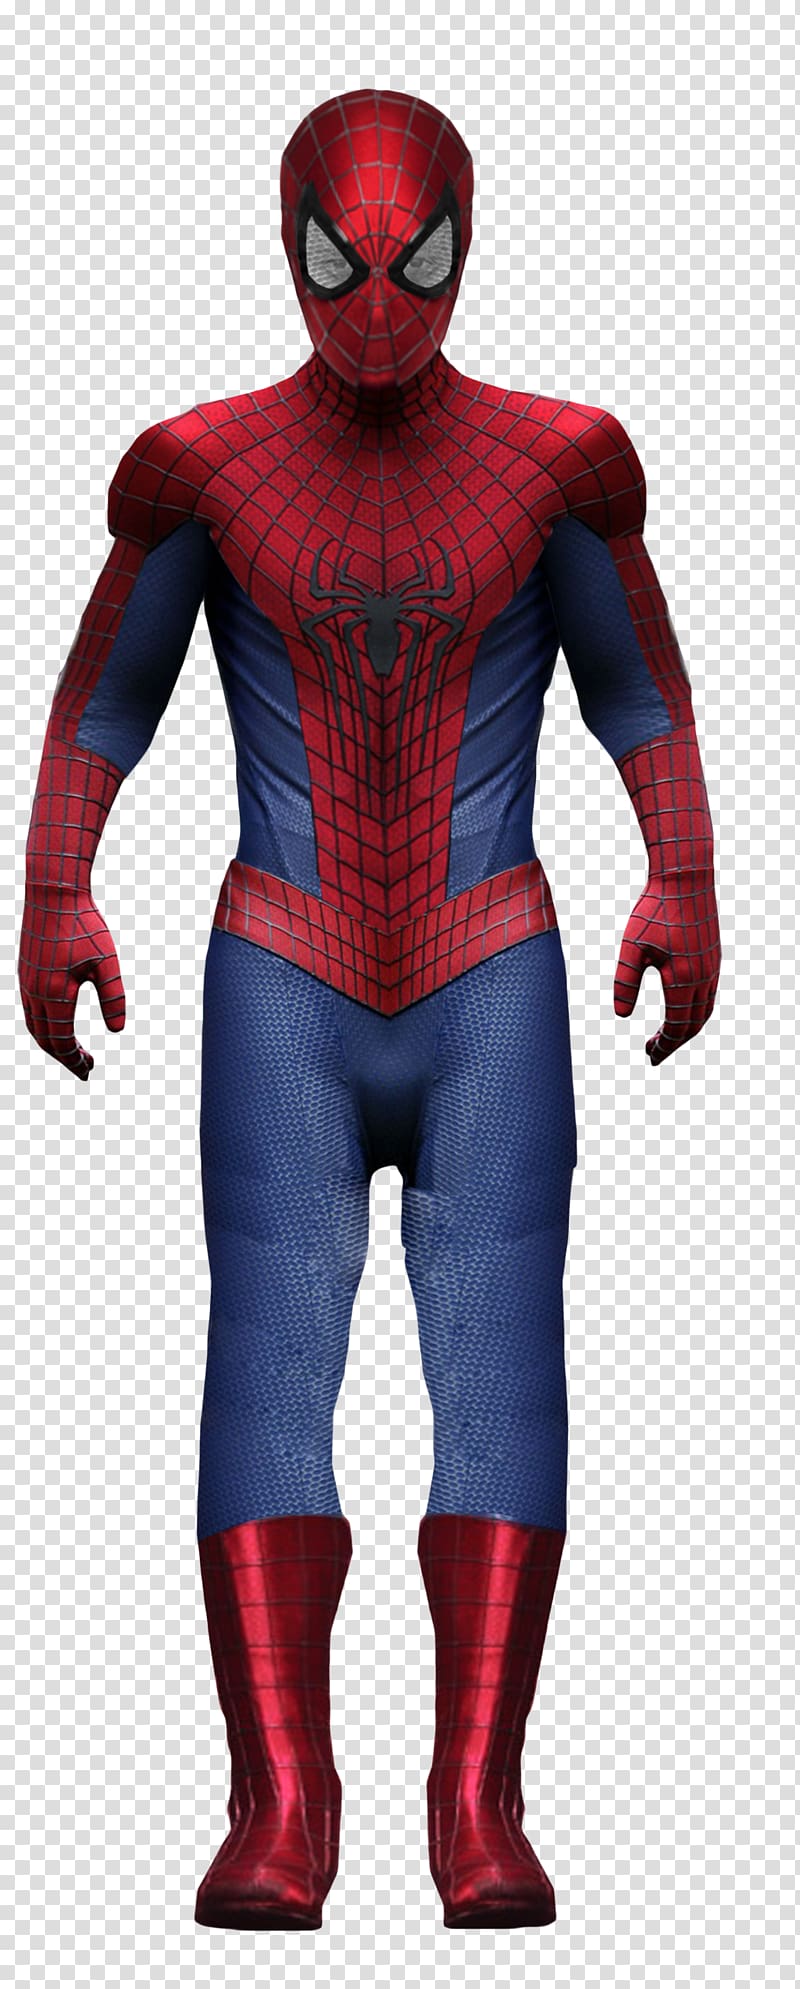 Marvel Spider-Man art, Spider-Man: Homecoming film series Suit Symbiote Mask, spiderman transparent background PNG clipart